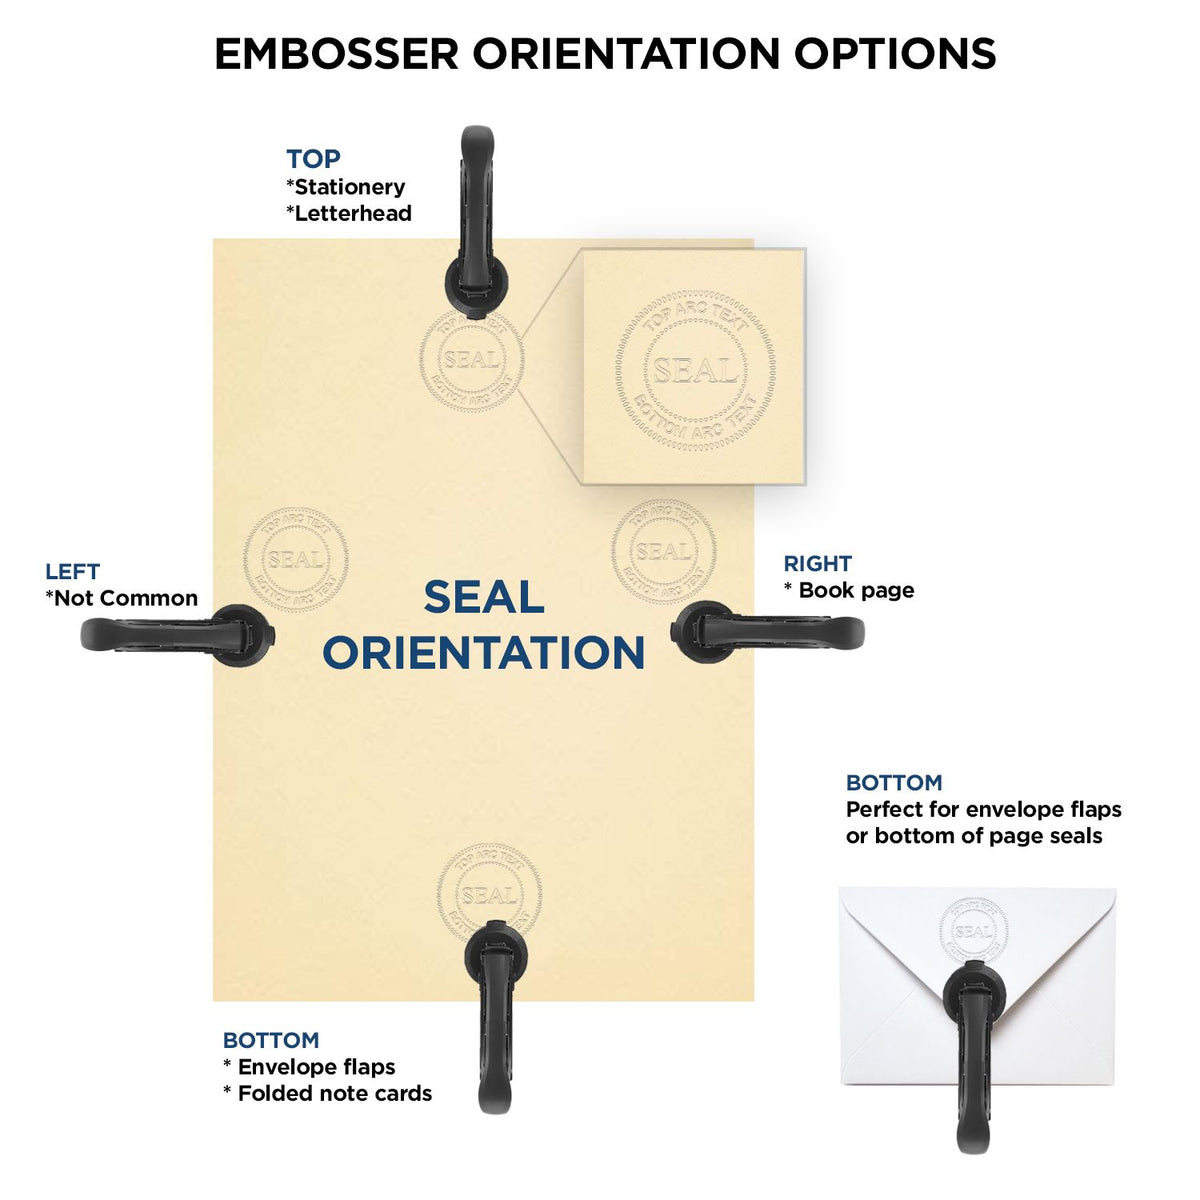 An infographic for the State of Kentucky Extended Long Reach Geologist Seal showing embosser orientation, this is showing examples of a top, bottom, right and left insert.